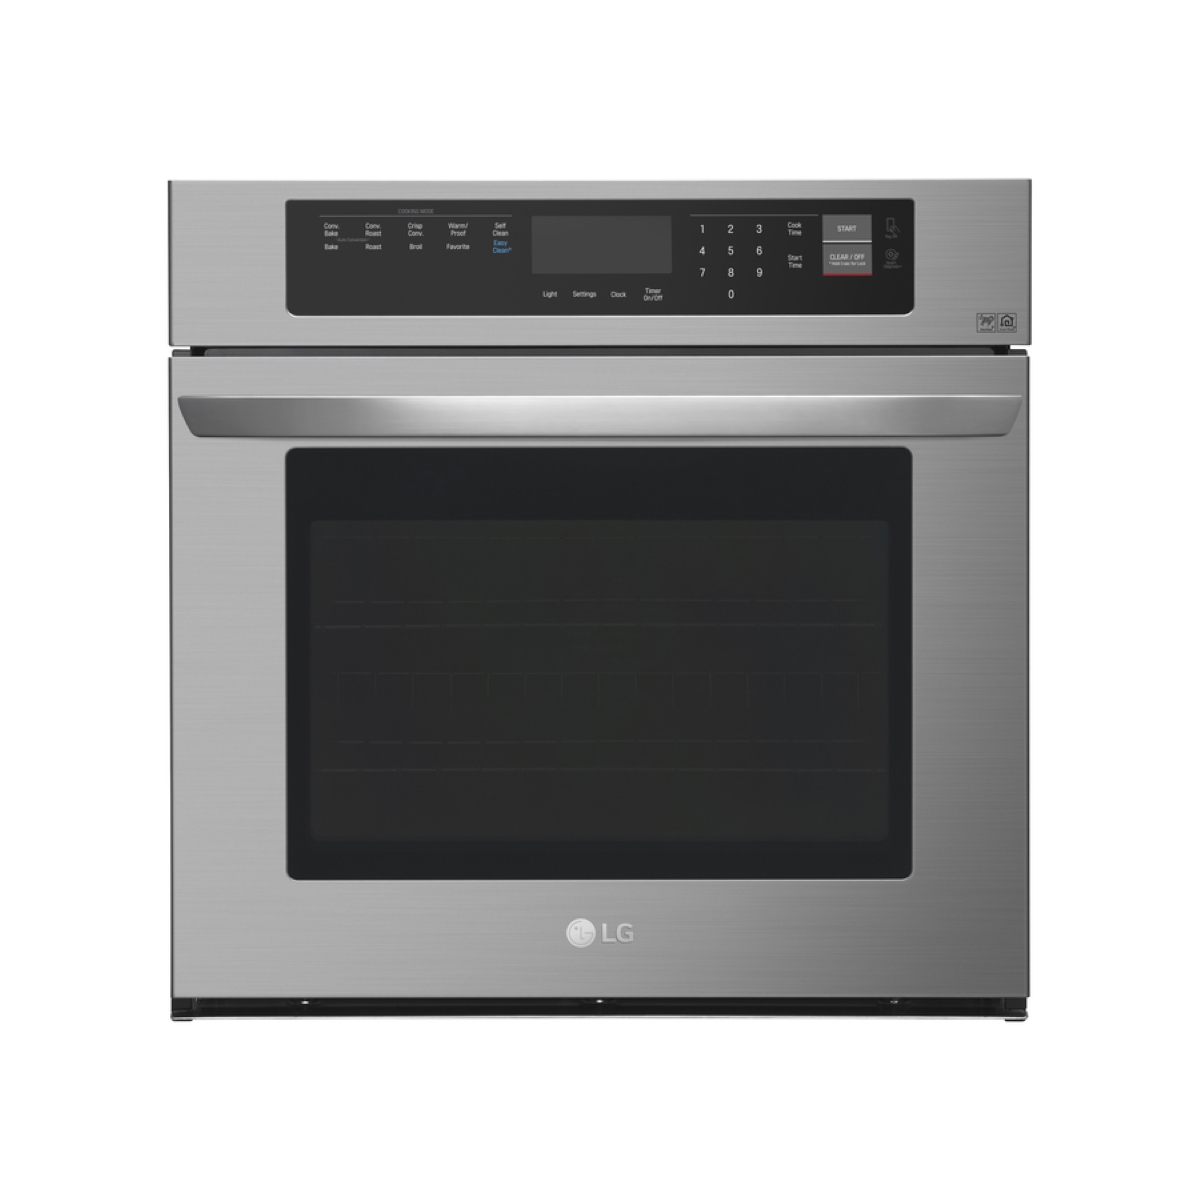 How To Fix The Error Code F2 For LG Oven